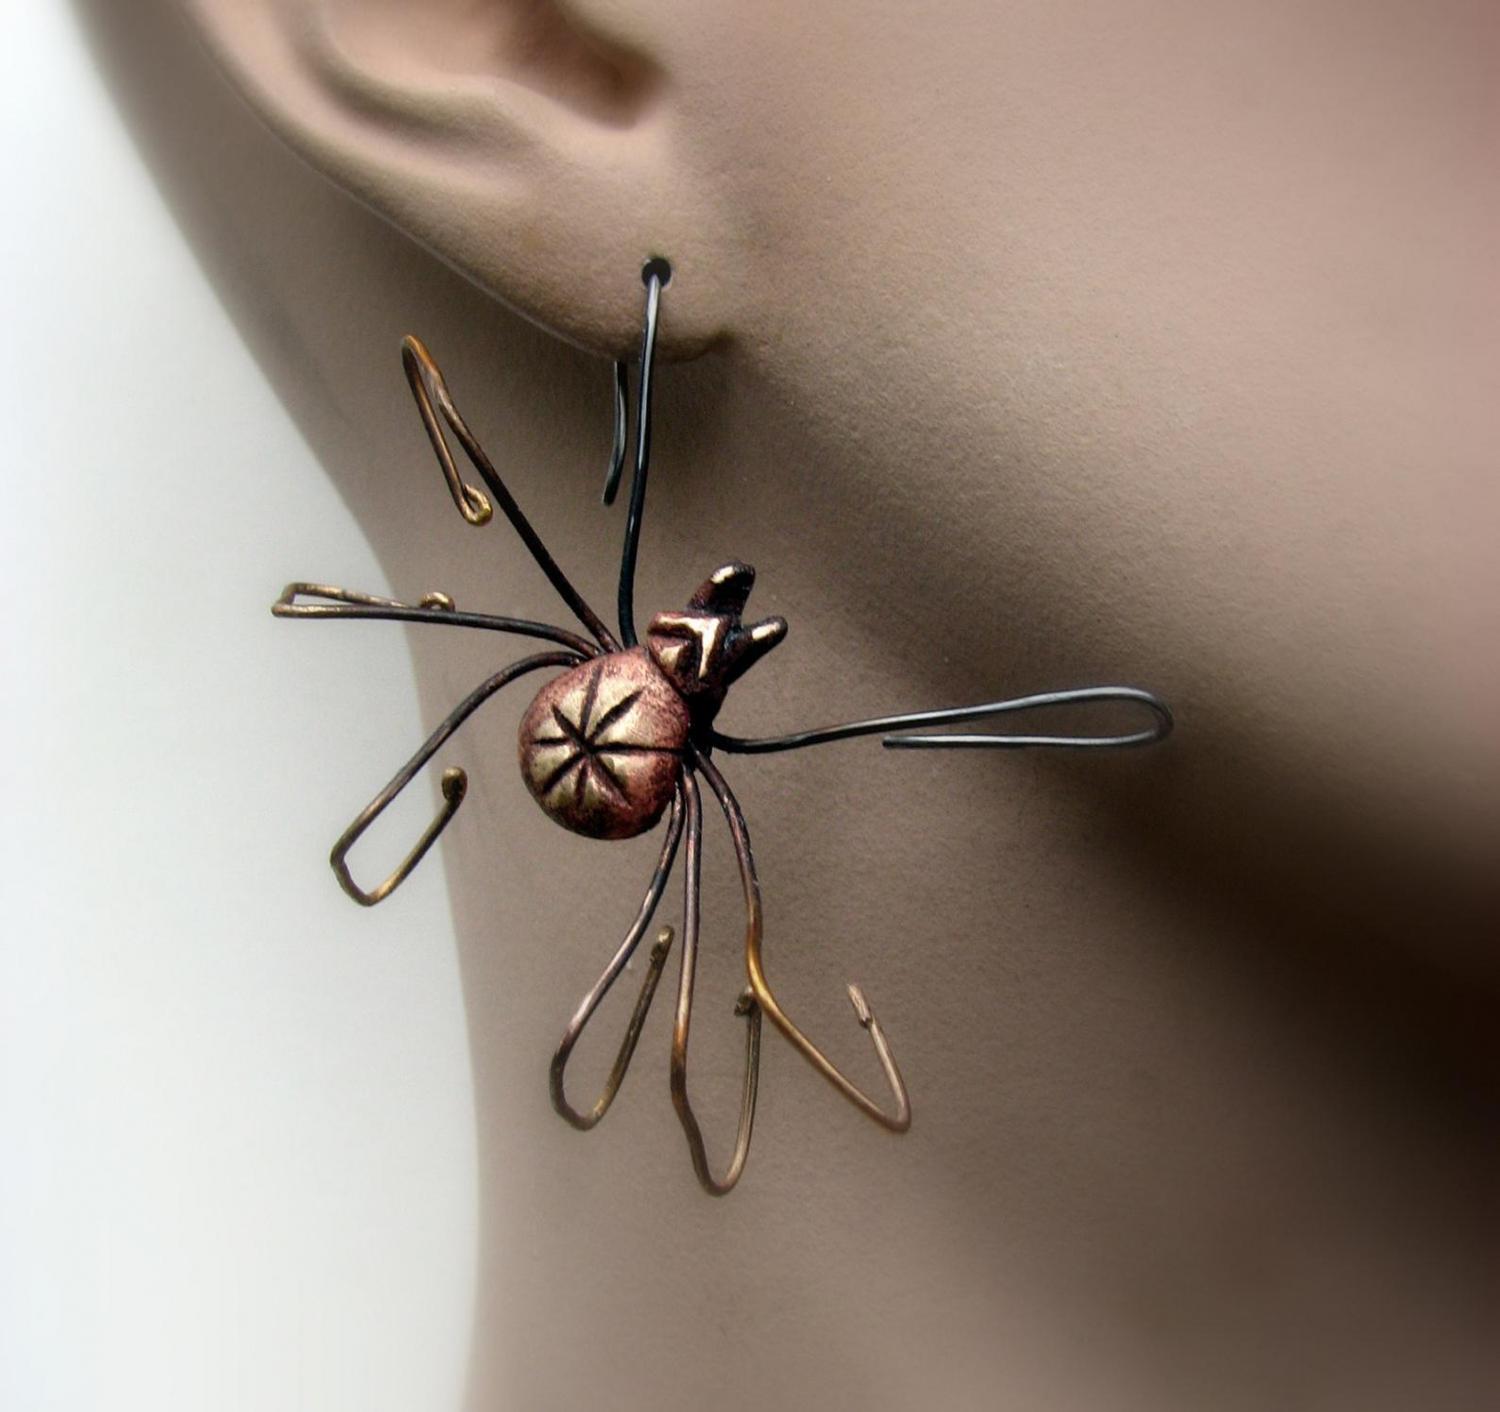 Giant Spider Earrings - Dangling spider earrings with spider leg through ear hole